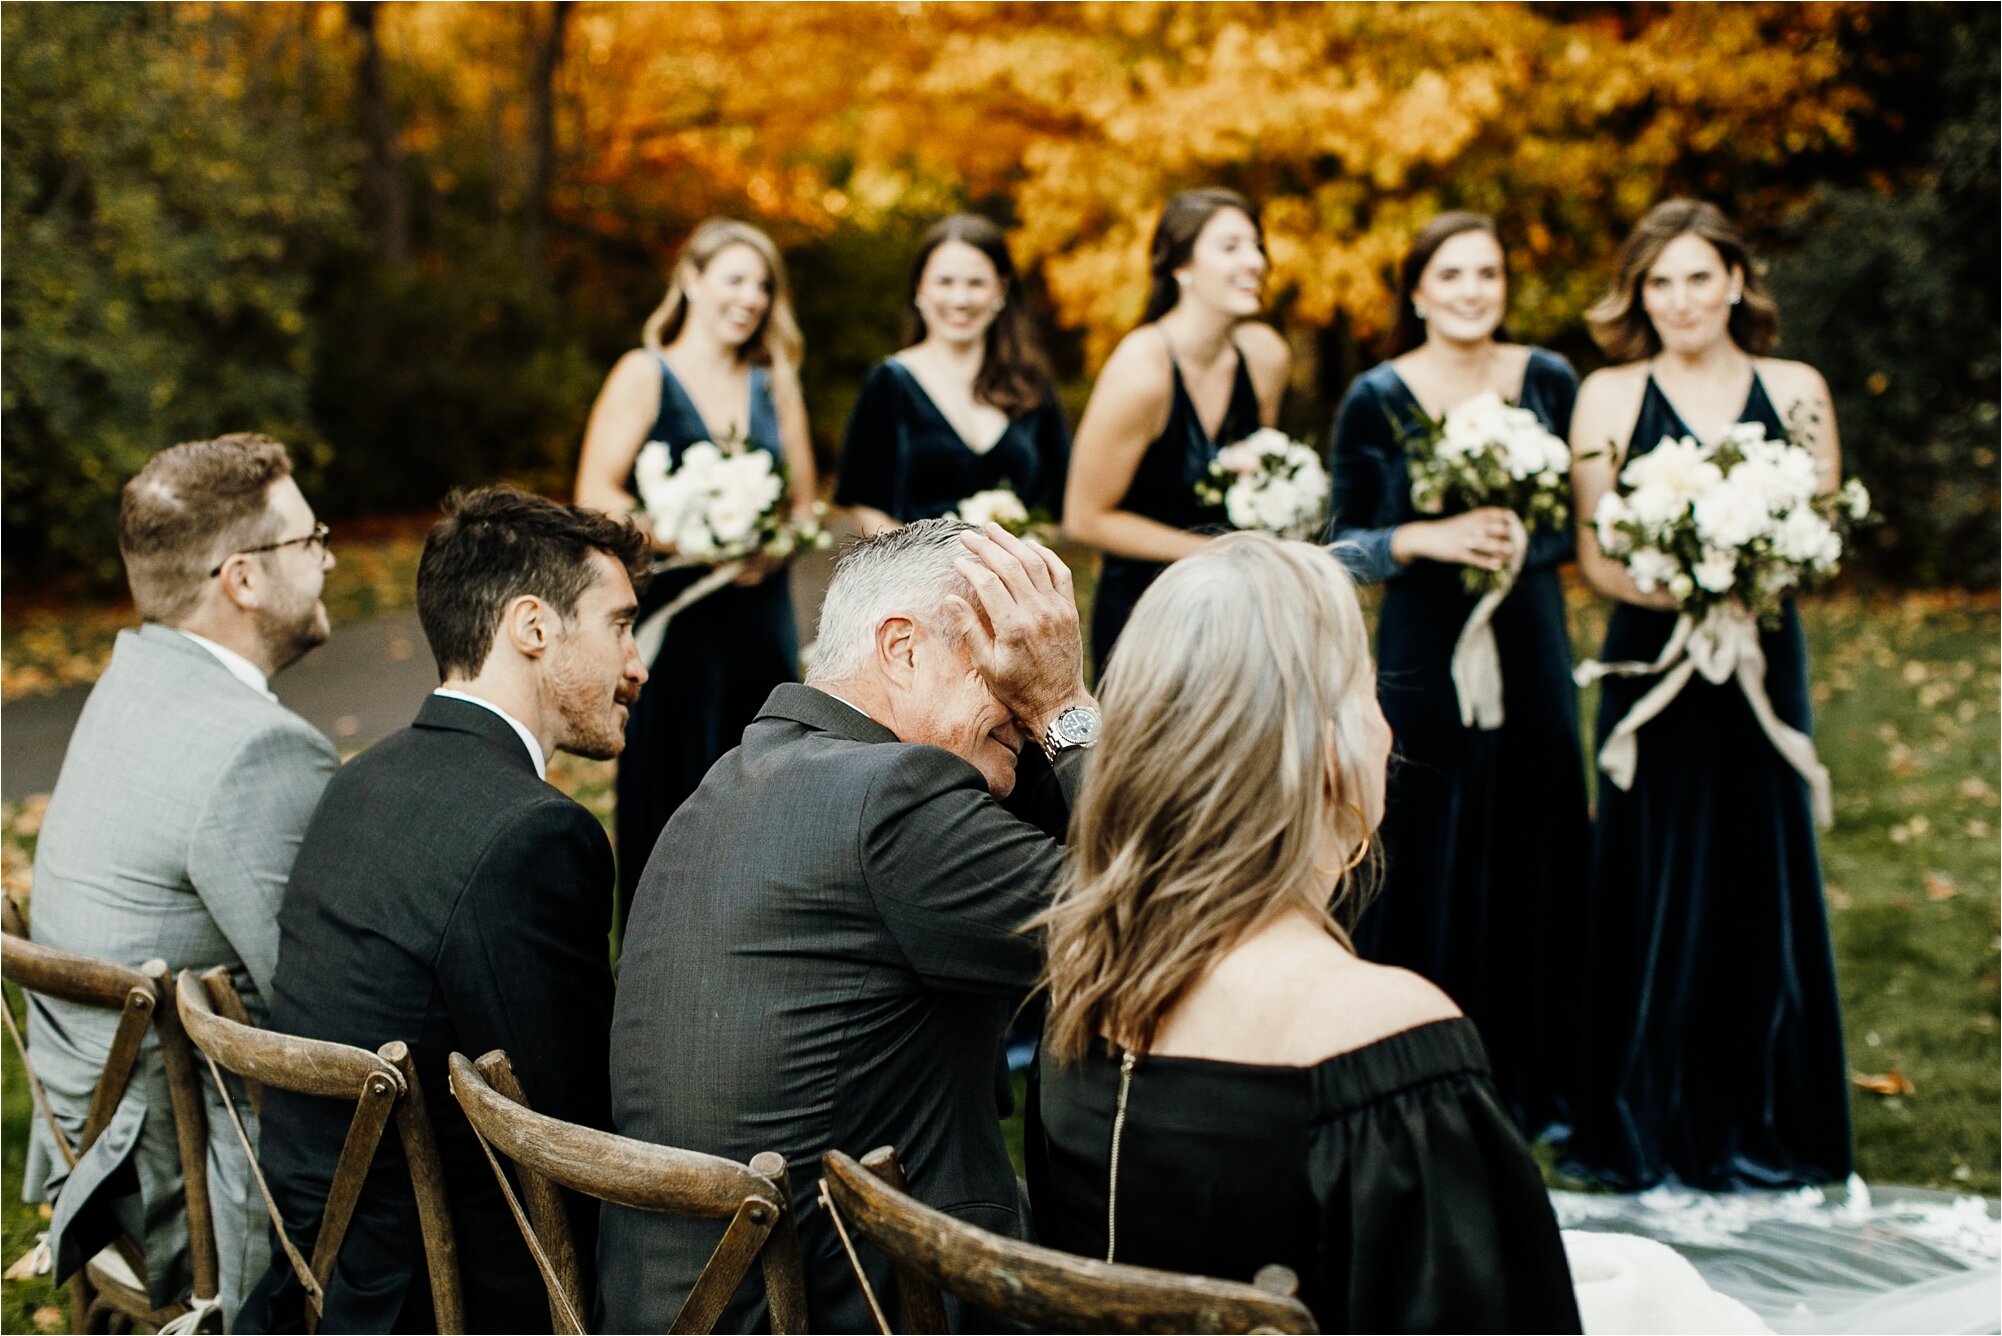  Intimate Backyard Mequon, Wisconsin Fall Wedding | MADELINE ceremony photos candid guests crying emotional day marriage 